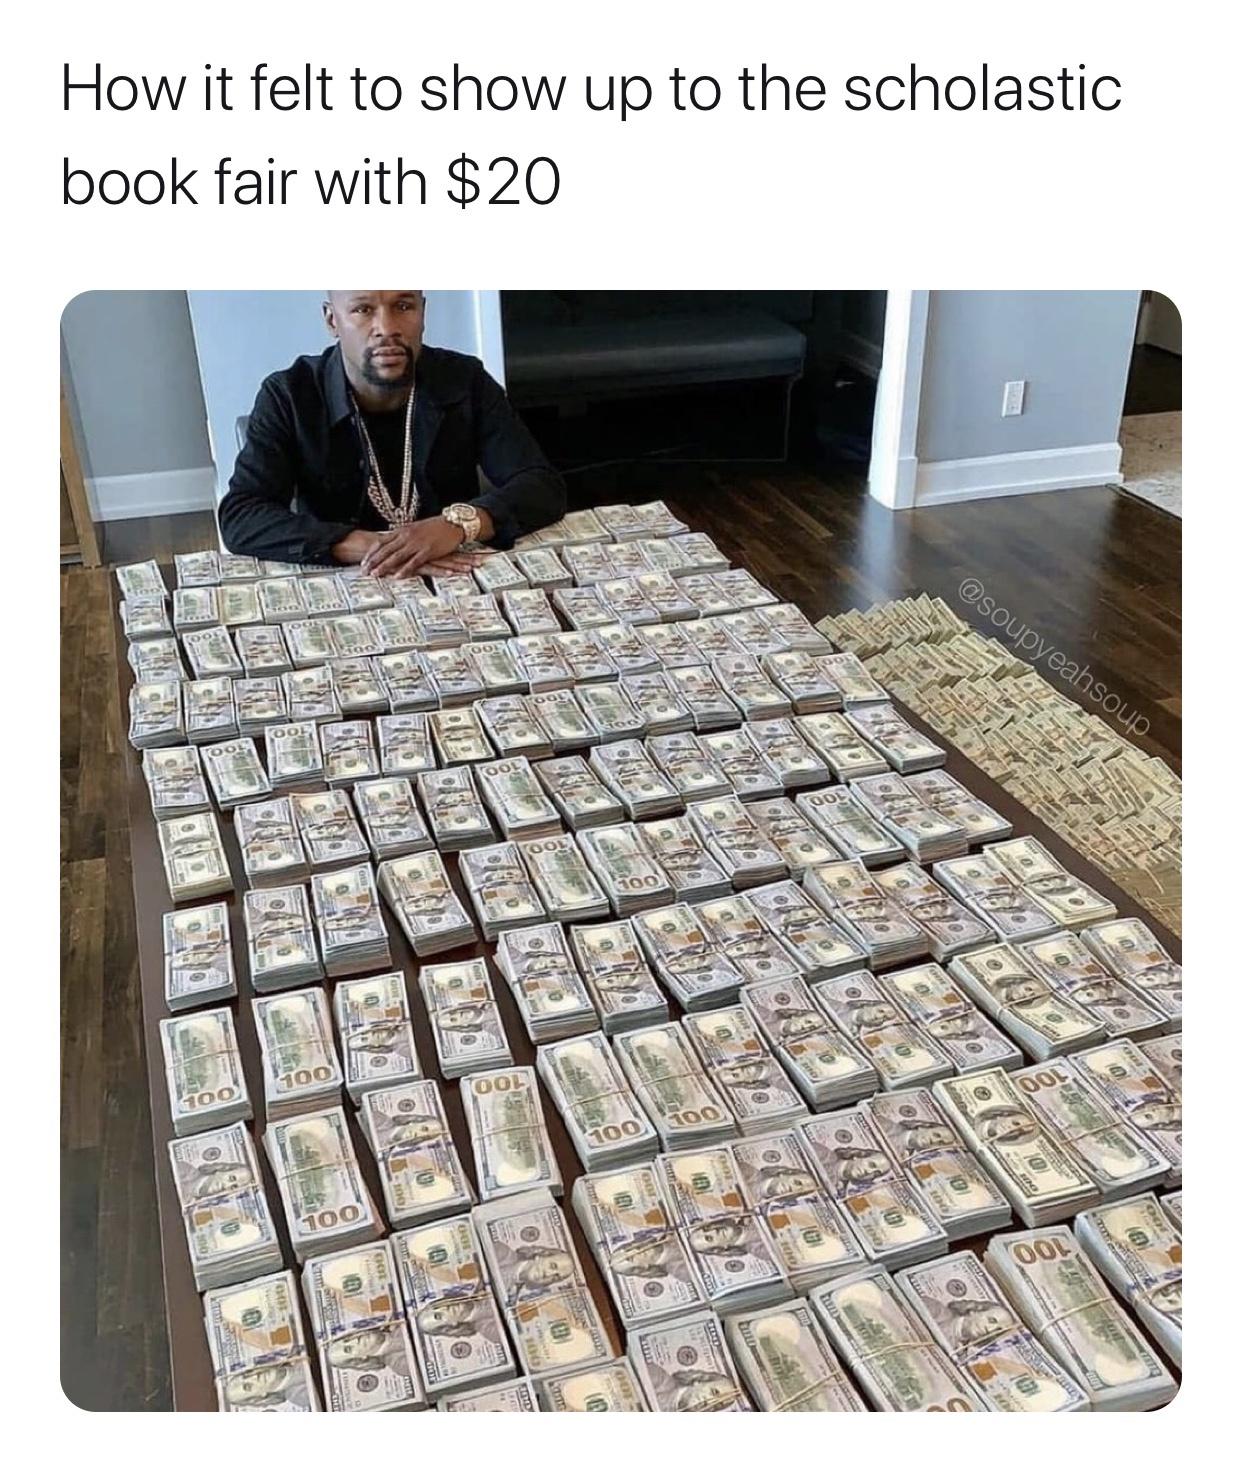 instagram floyd mayweather - How it felt to show up to the scholastic book fair with $20 Ool 100 100 Ool Dol 1100 100100 22 100 Coor Ool Batohy 4